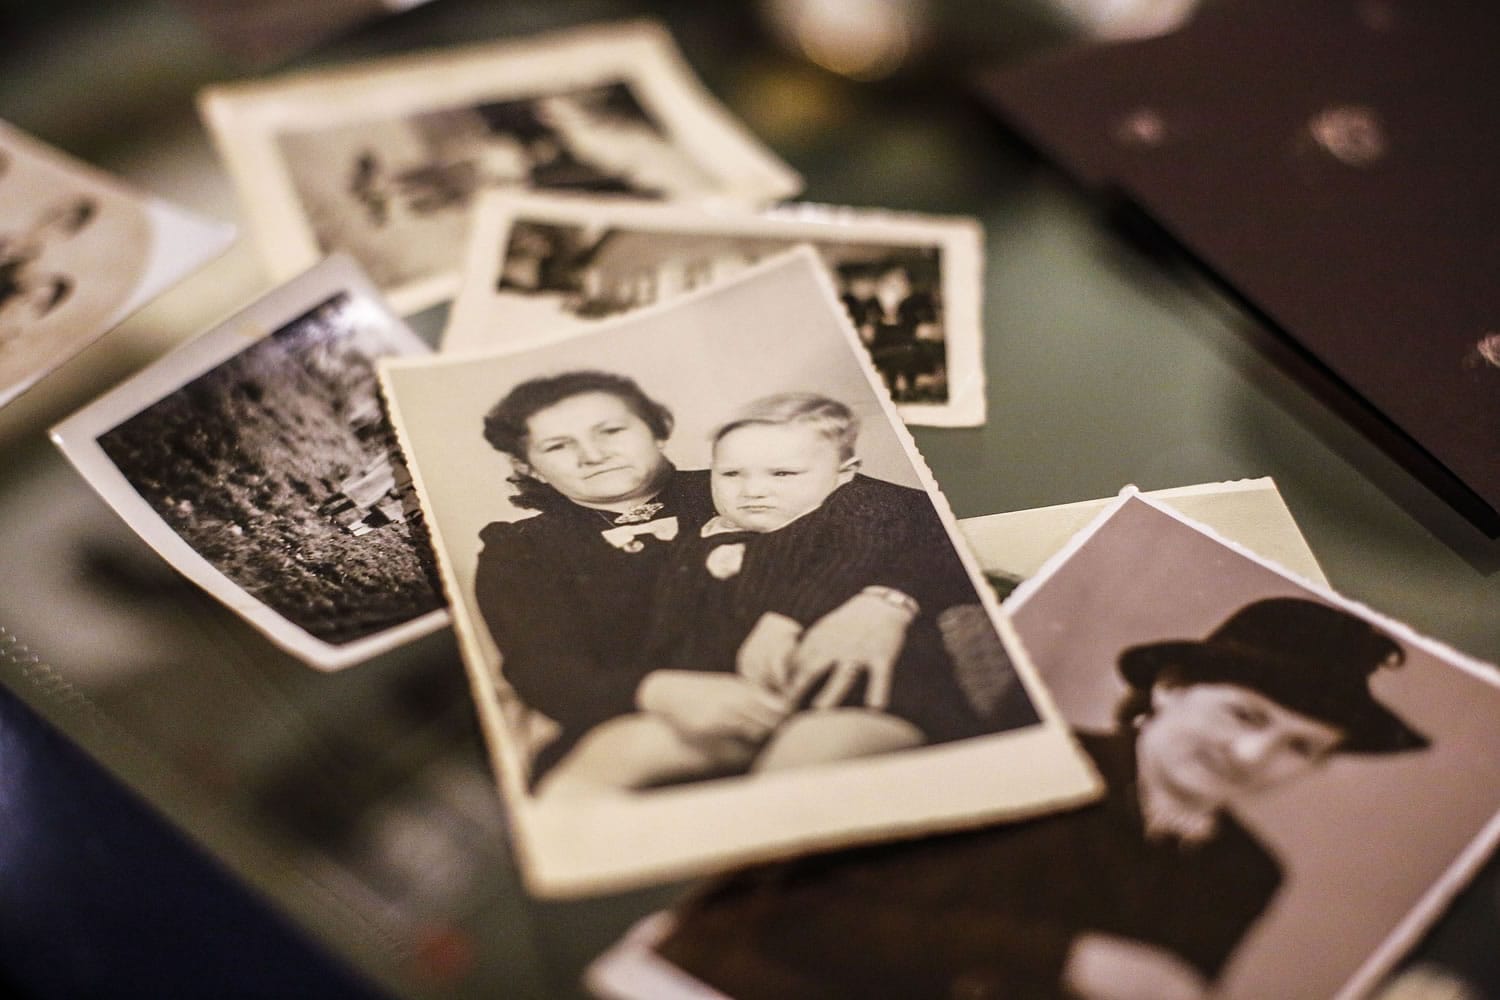 This undated family photo provided by Paul Schmitz, a son of a United States WWII soldier, show him as a little boy with his mother, center picture. Paul Schmitz spoke with The Associated Press about his father and his life in post WWII Germany during an interview at the Allied Museum in Berlin.